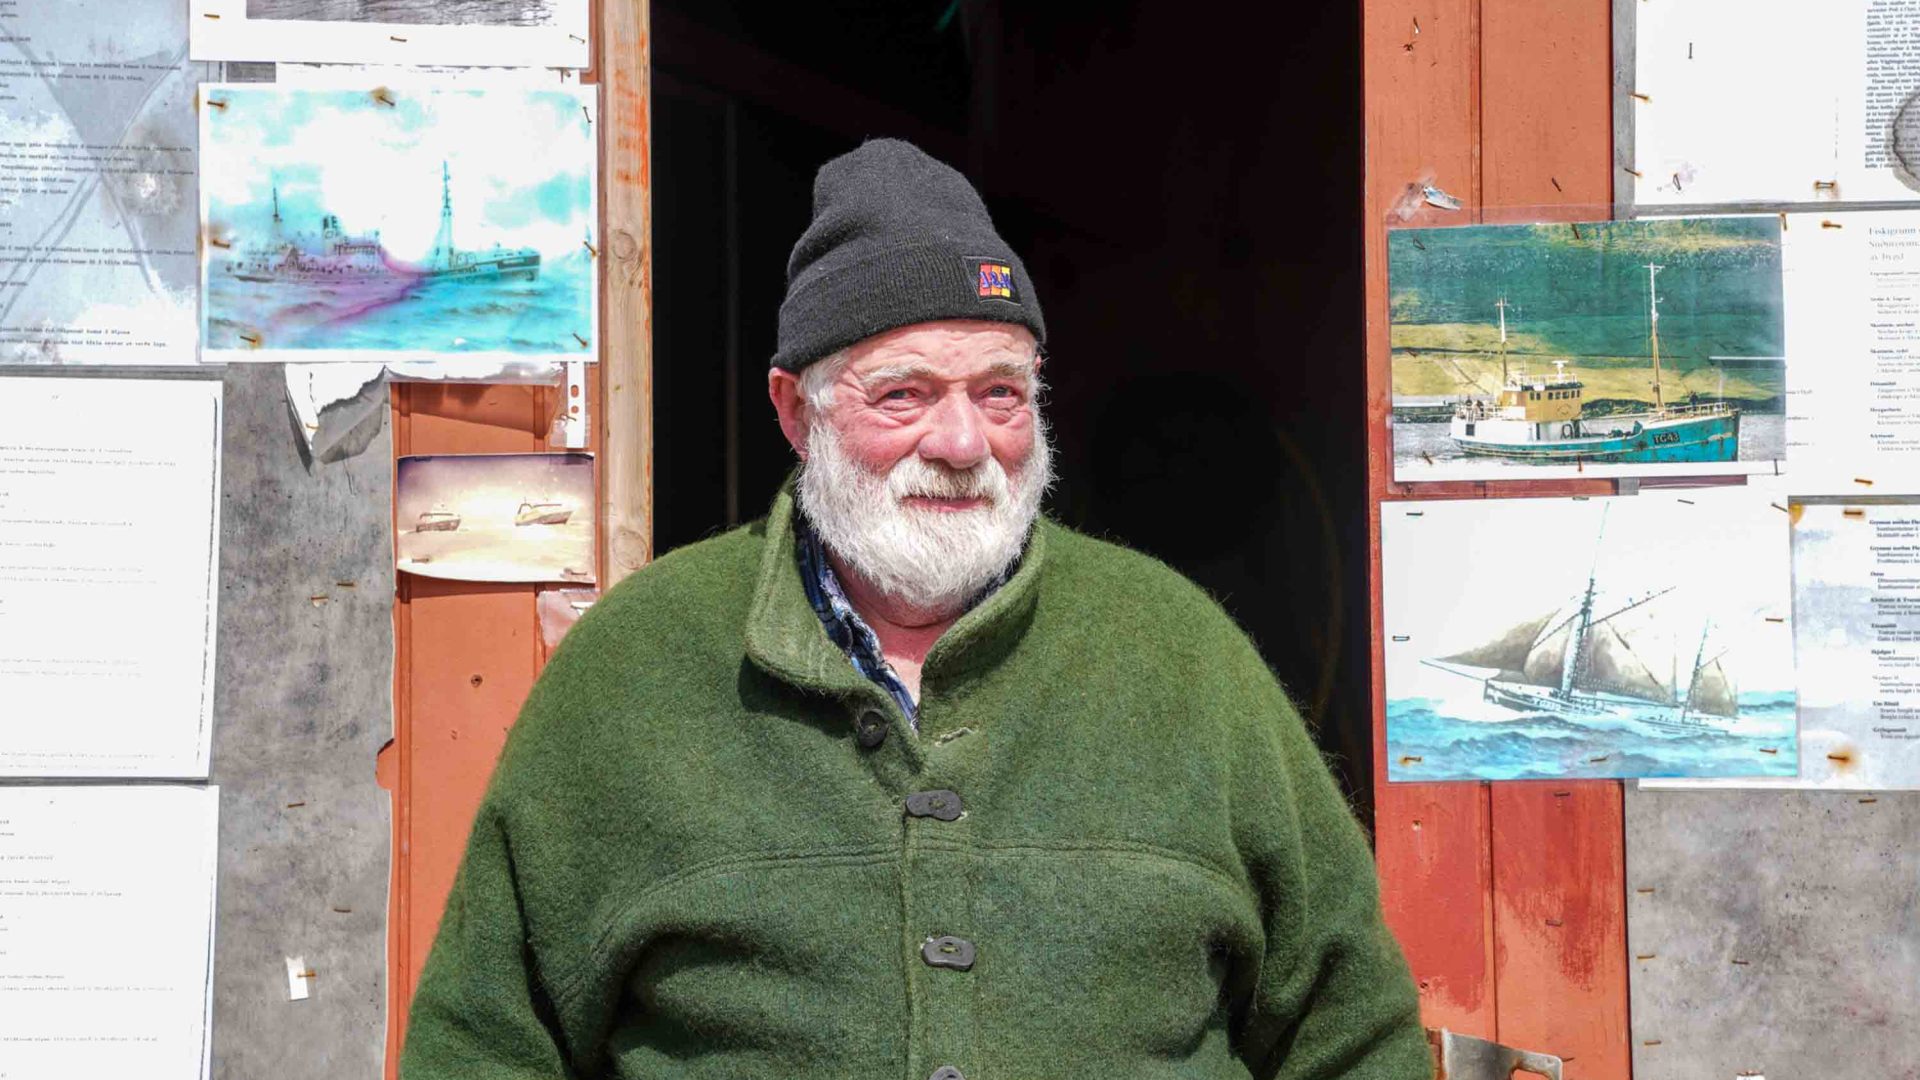 a portrait of an older man with a white beard and wearing a beanie on his head.